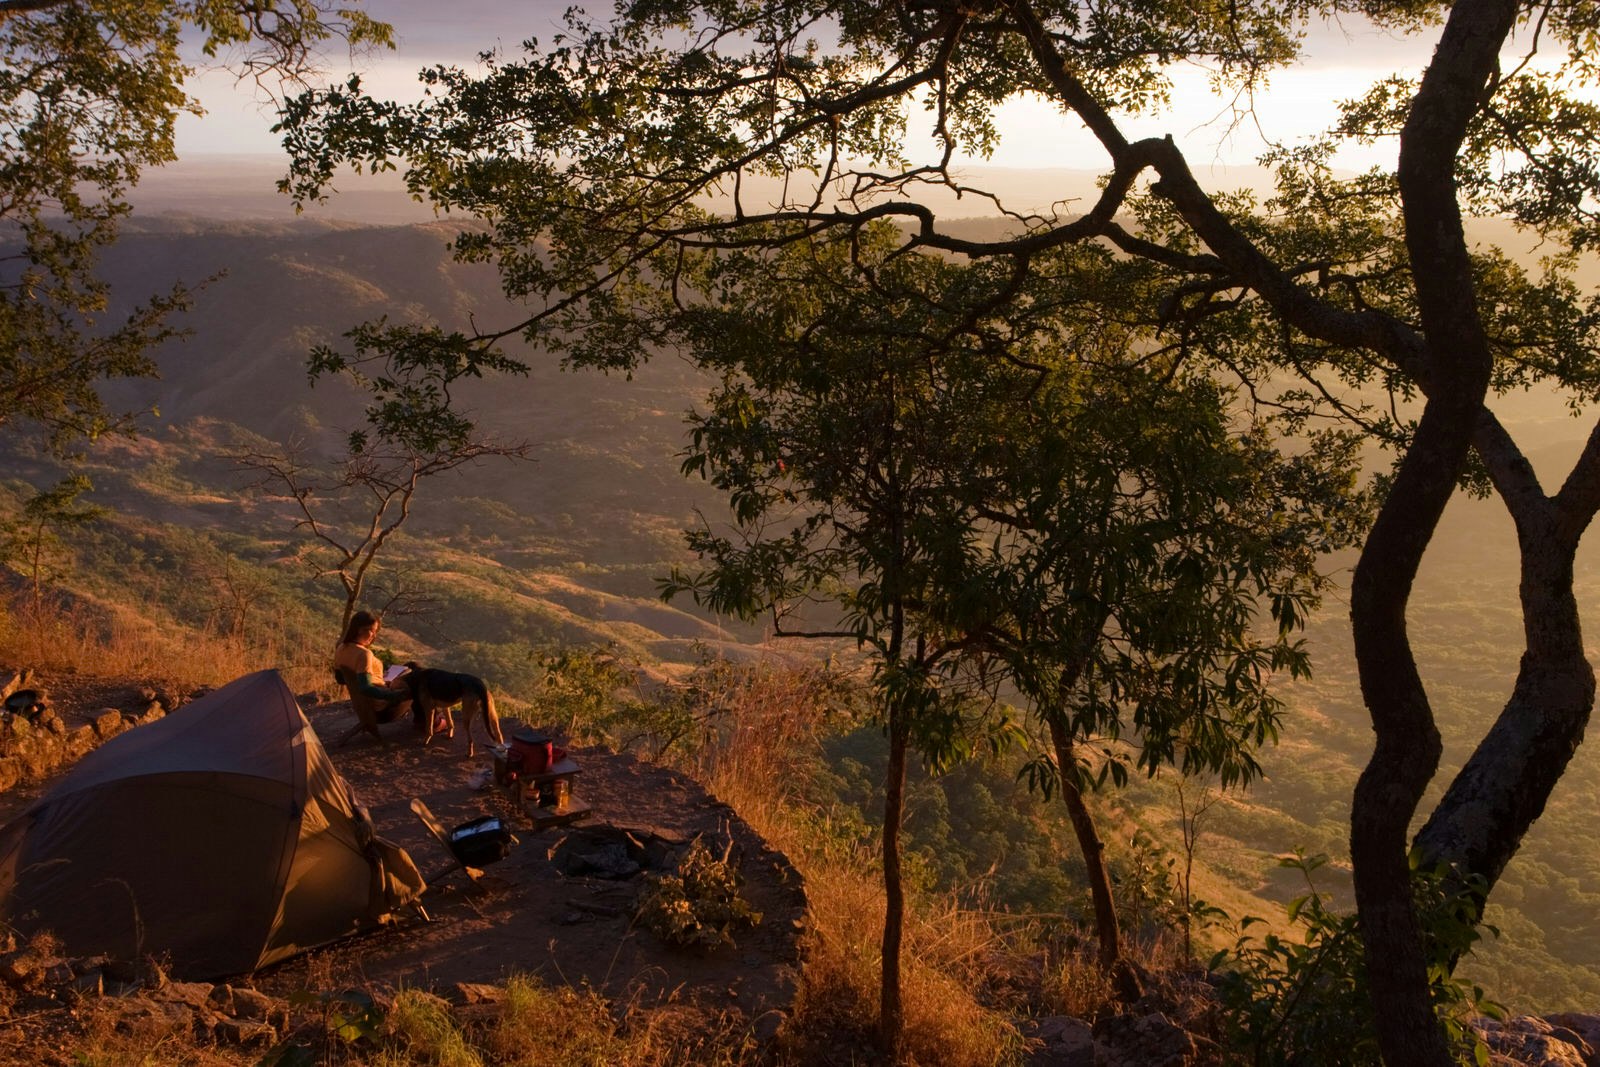 A woman sits in a camp chair next to her dog on a flat, circular campsite plot this is perched on the side of a steep slope overlooking the valley far below; the light is golden, likely at sunset